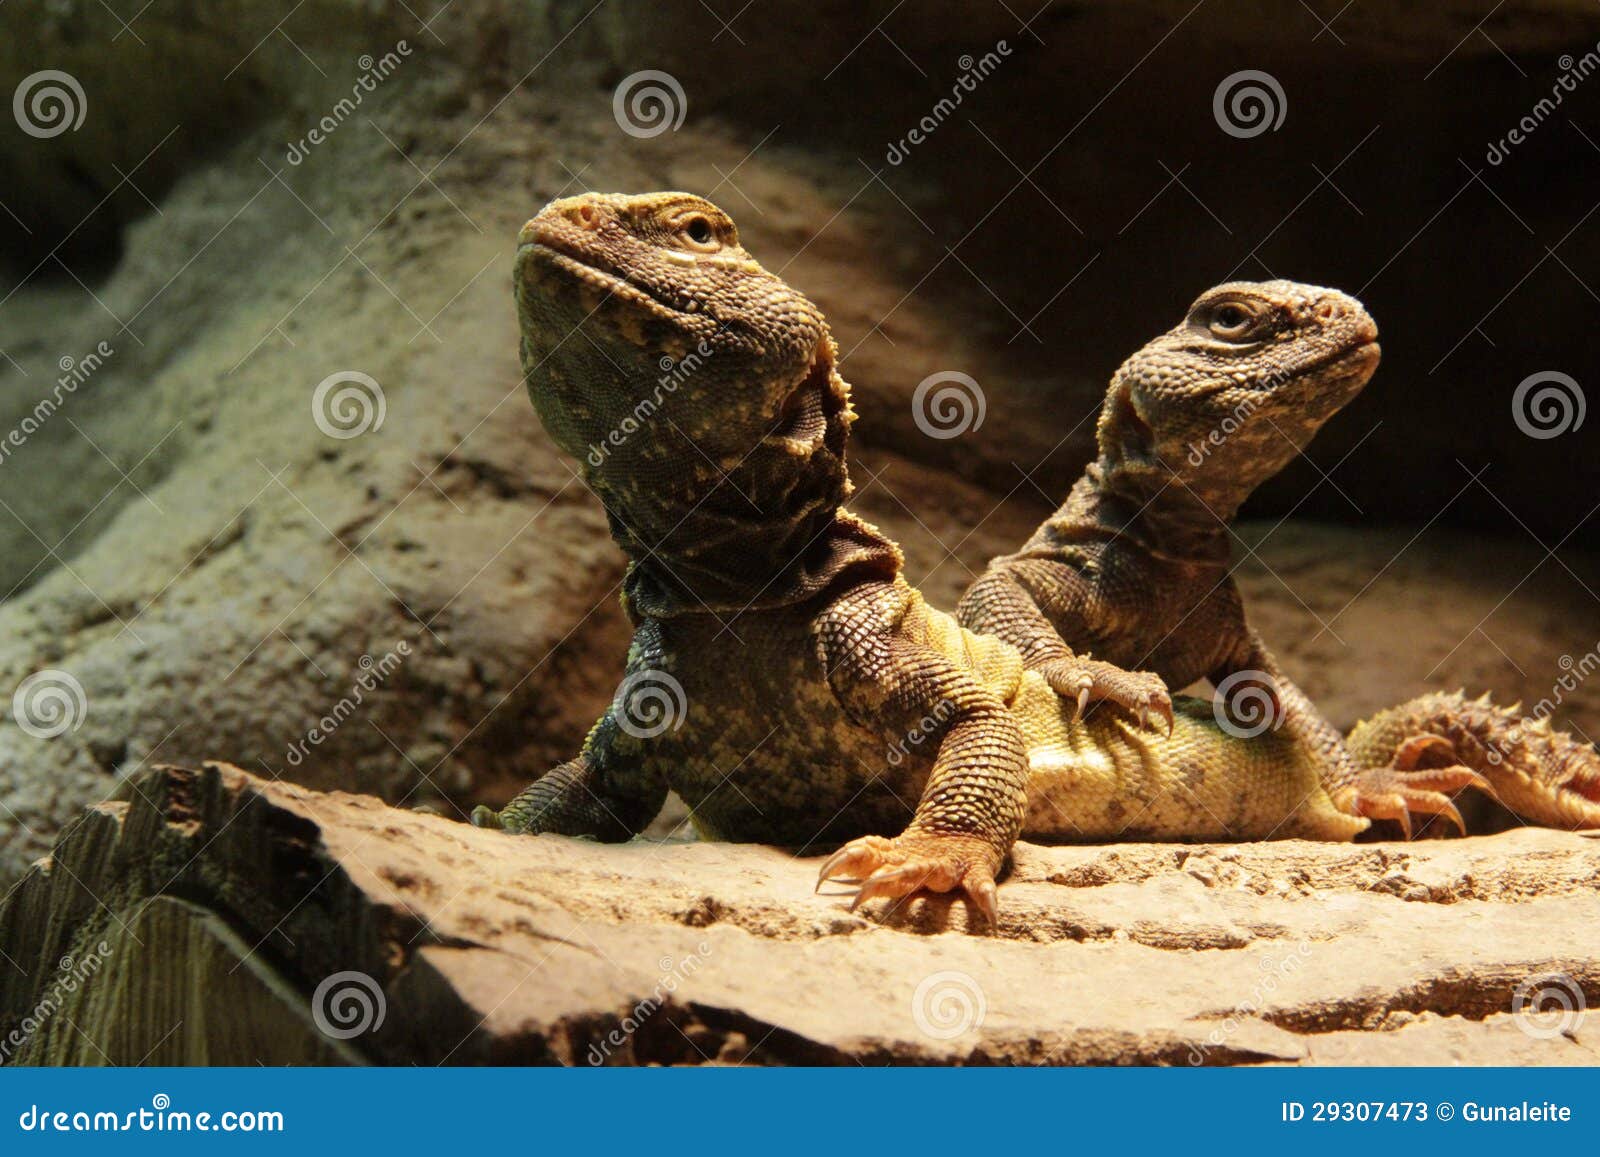 lizards: two central bearded dragons